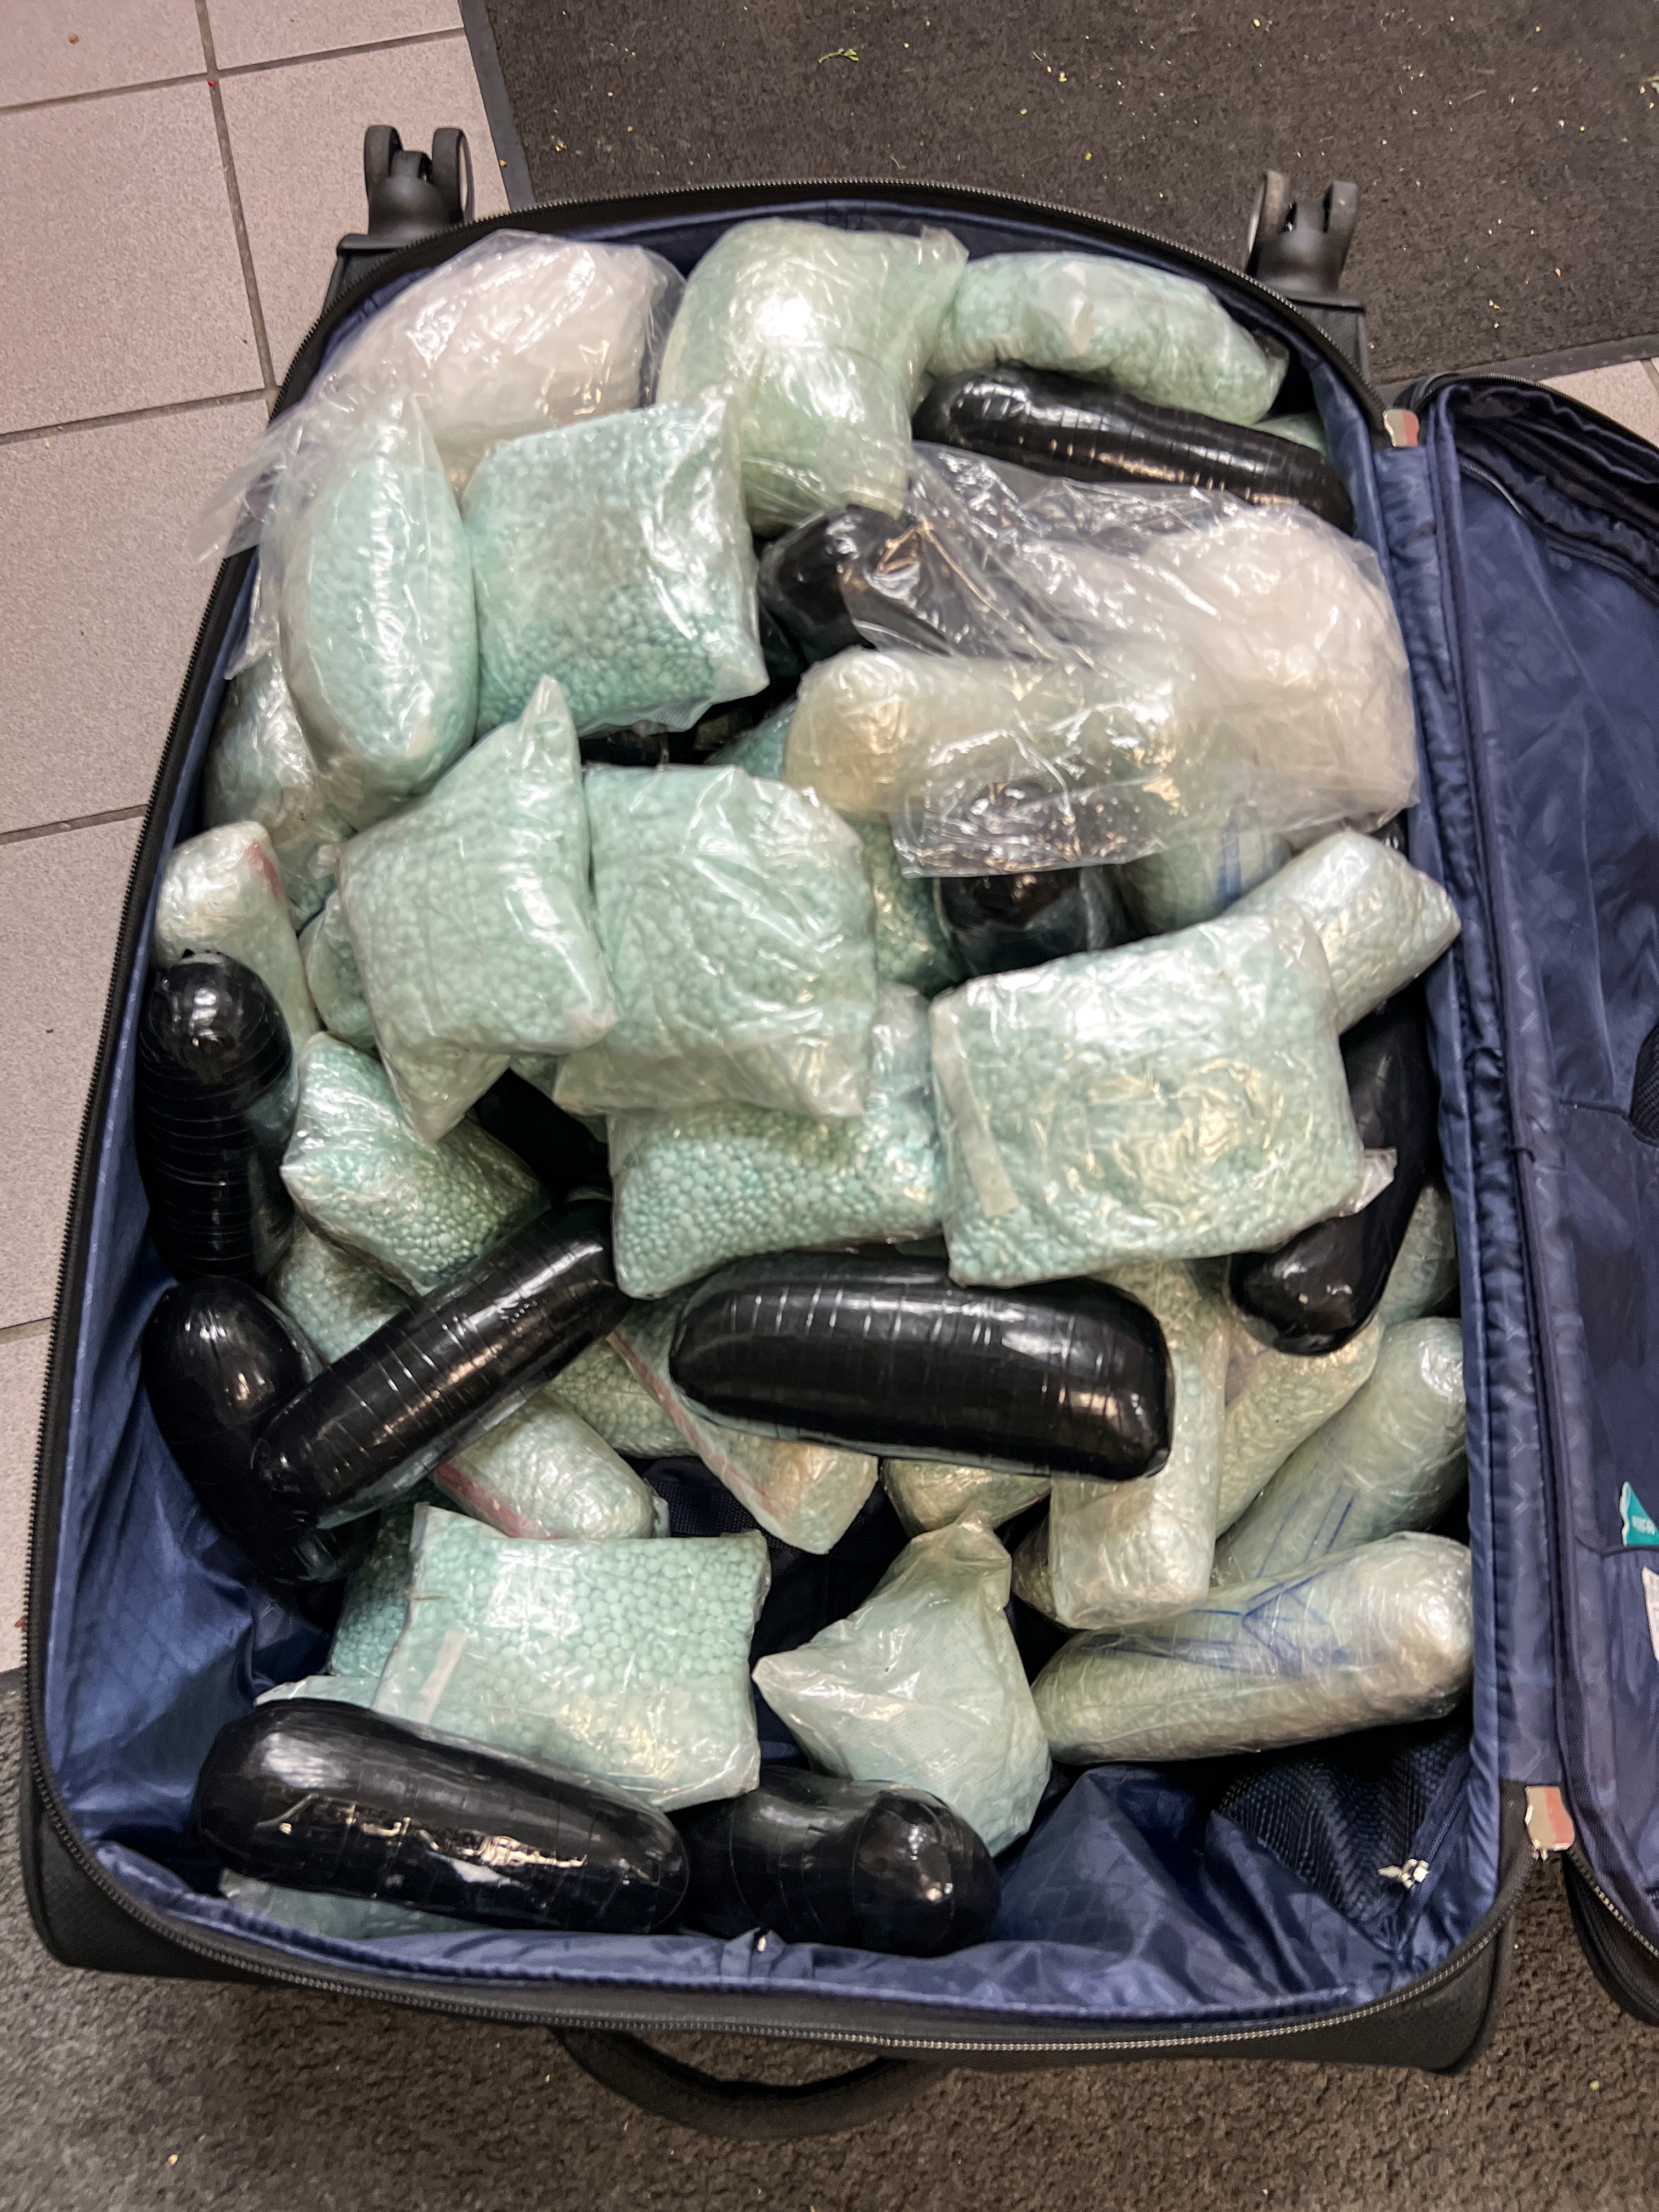 Plastic wrapped bundles of drugs in an open suitcase